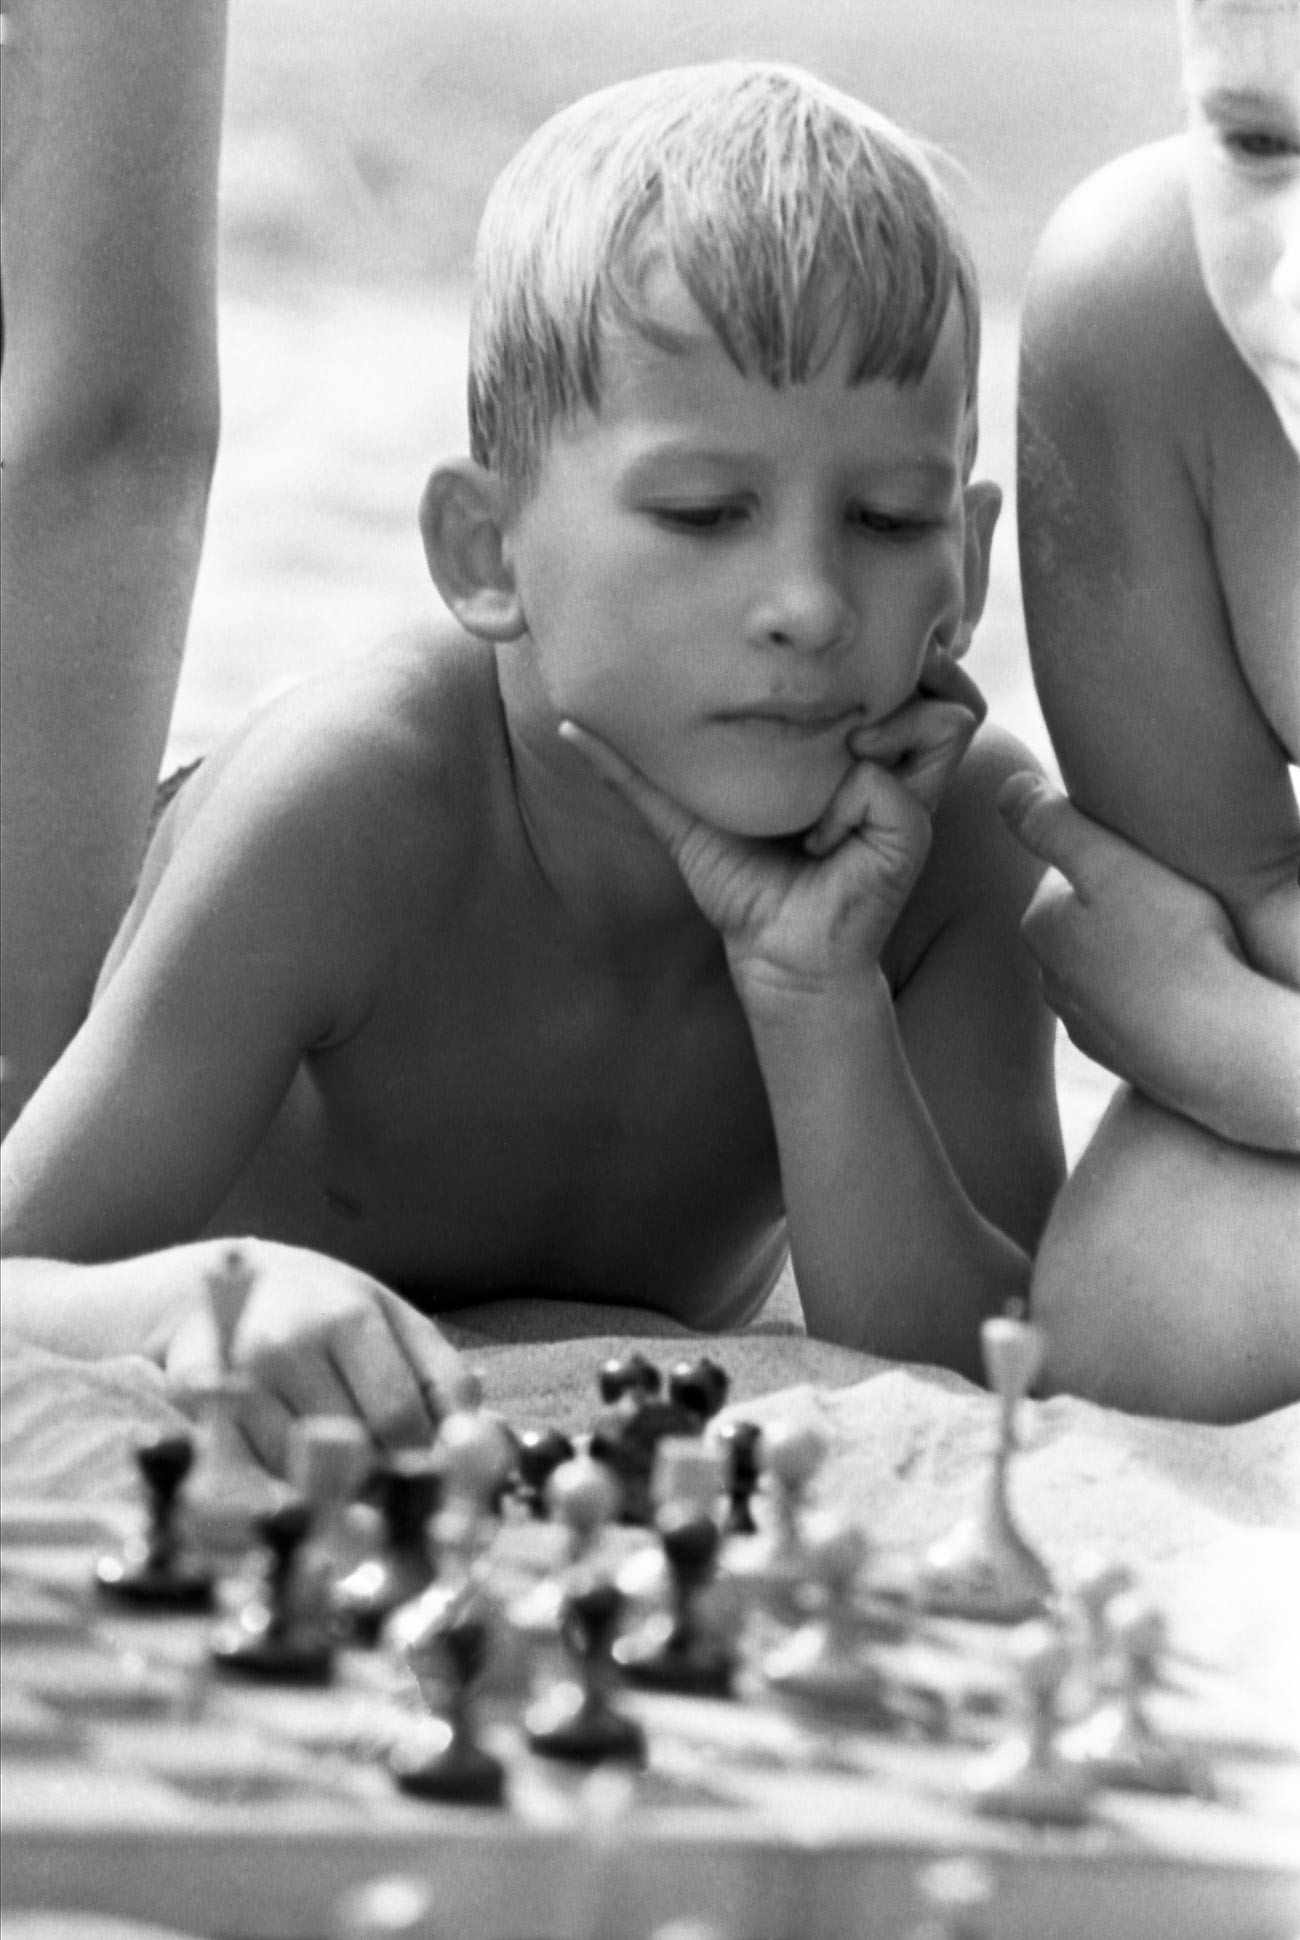 Chess was a very popular game among children and adults in the Soviet Union.